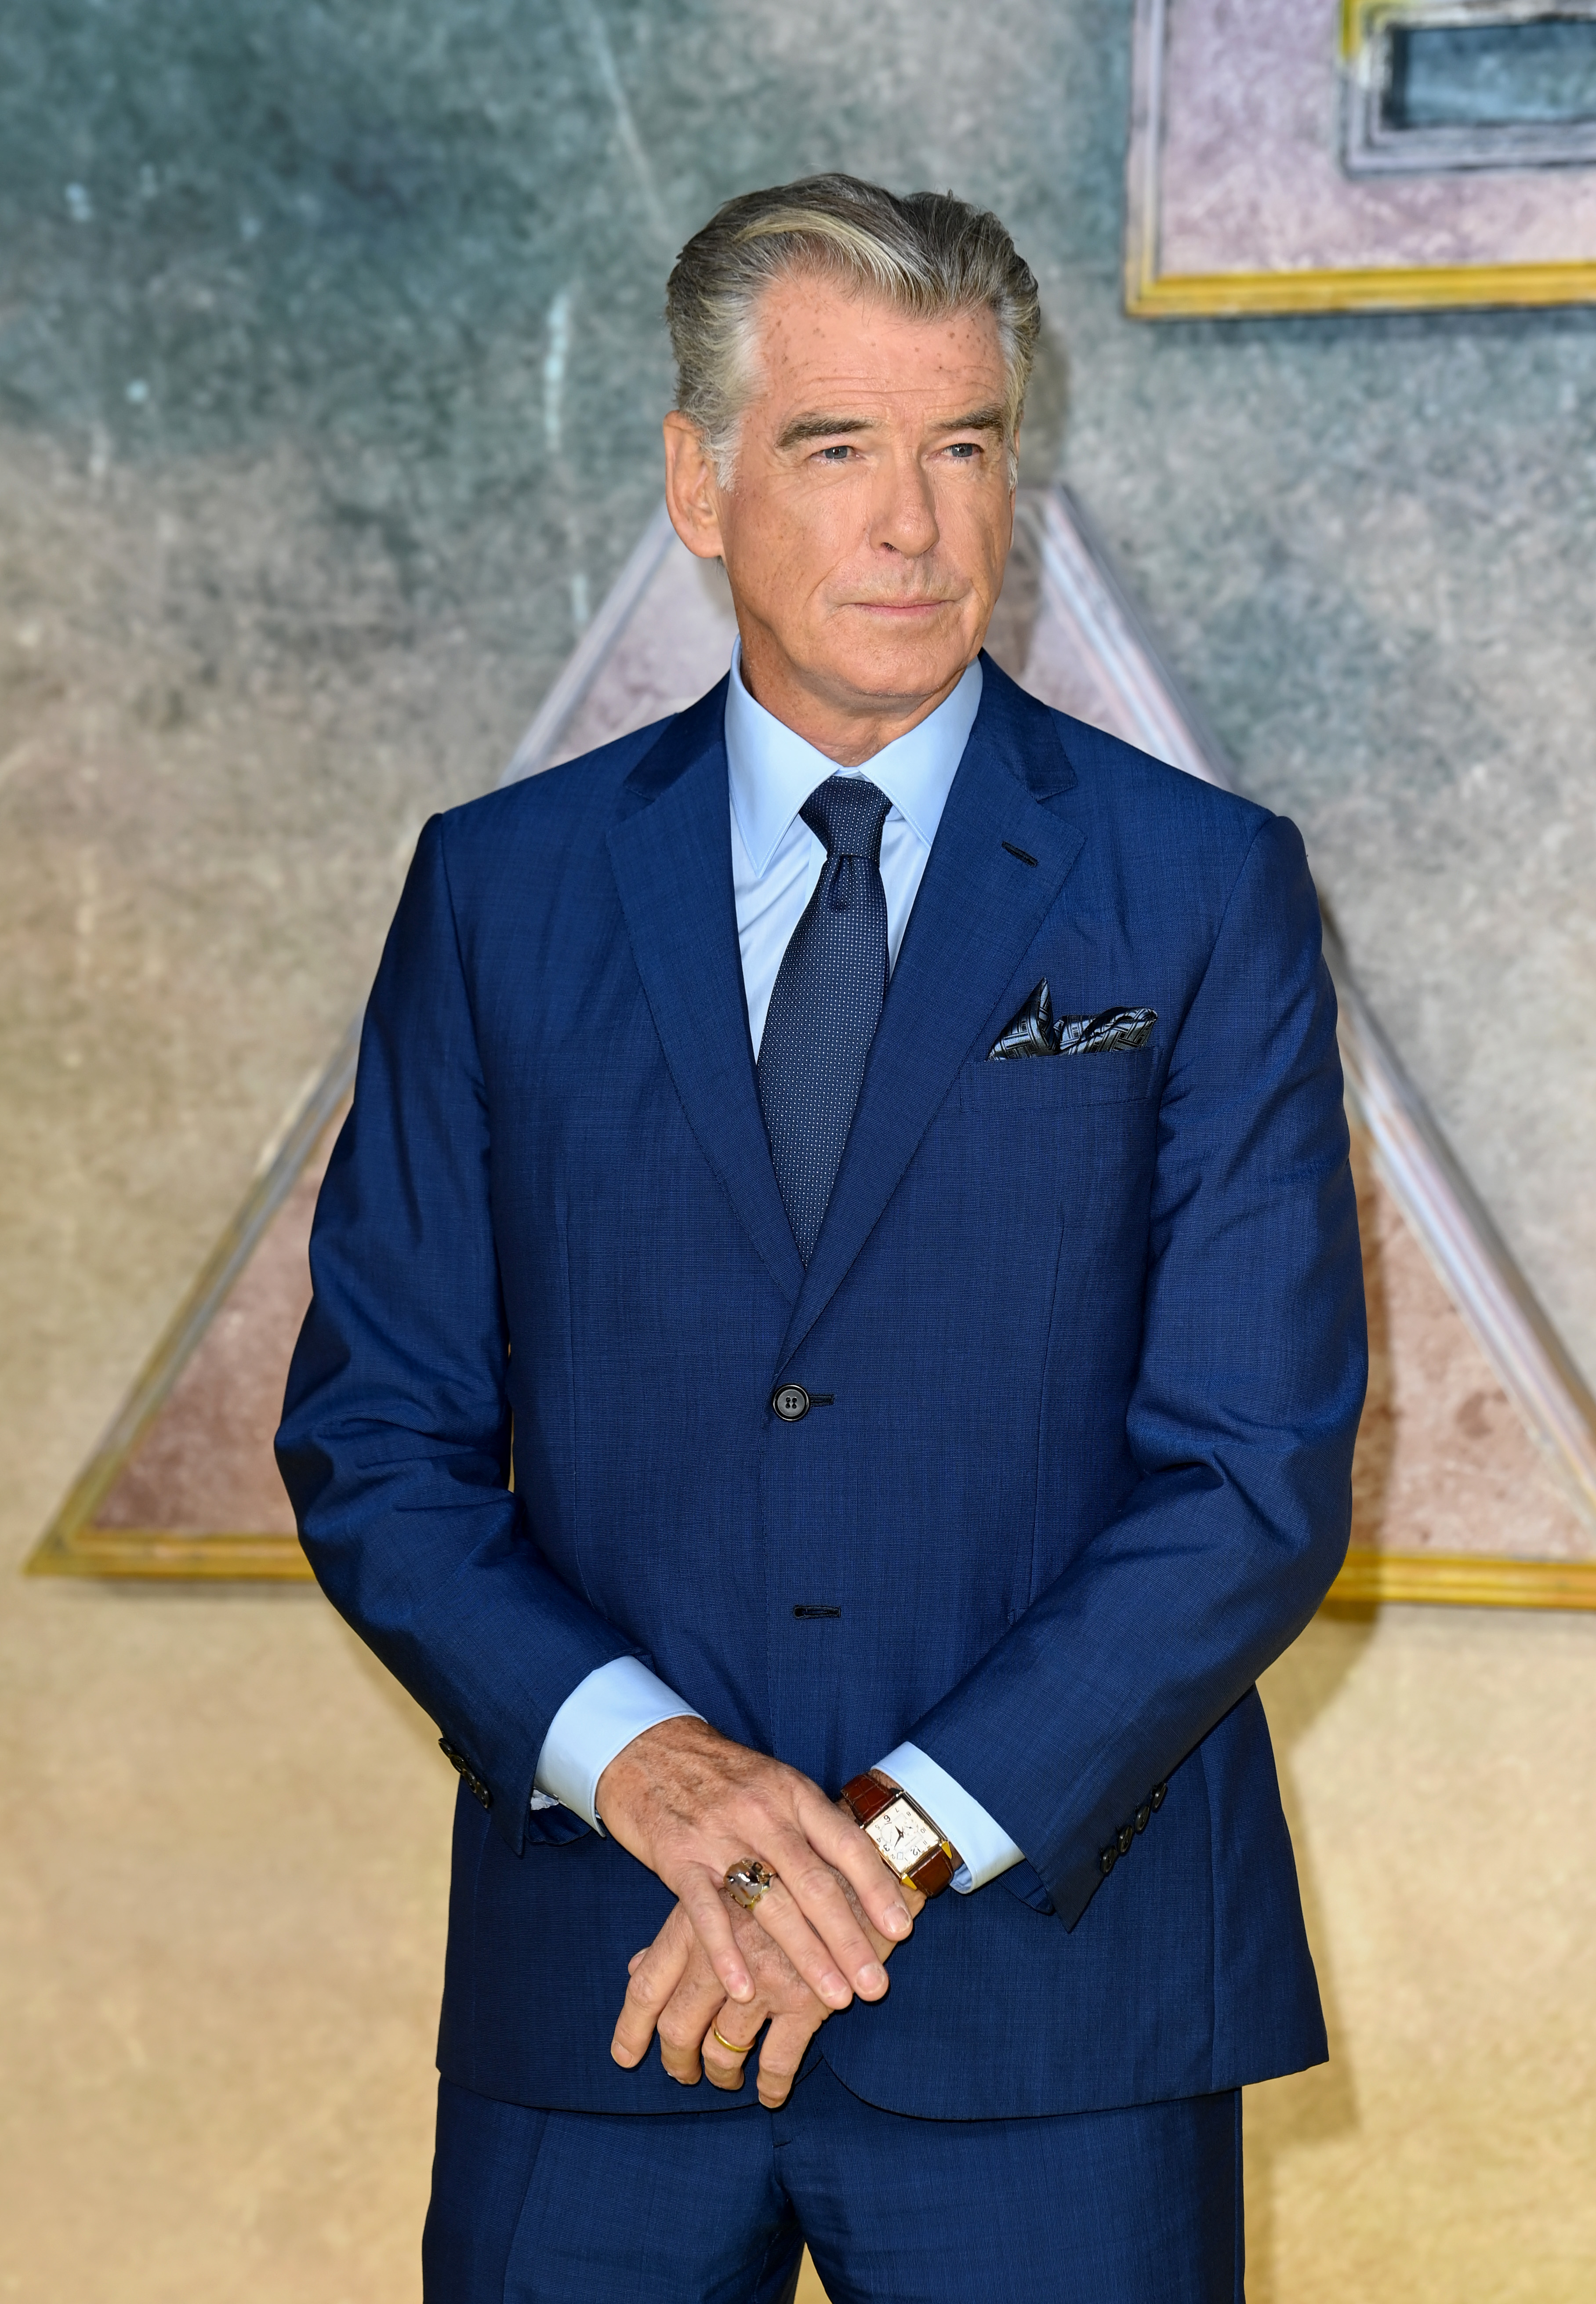 Pierce Brosnan attends the UK Premiere of "Black Adam" at Cineworld Leicester Square on October 18, 2022 in London, England | Source: Getty Images